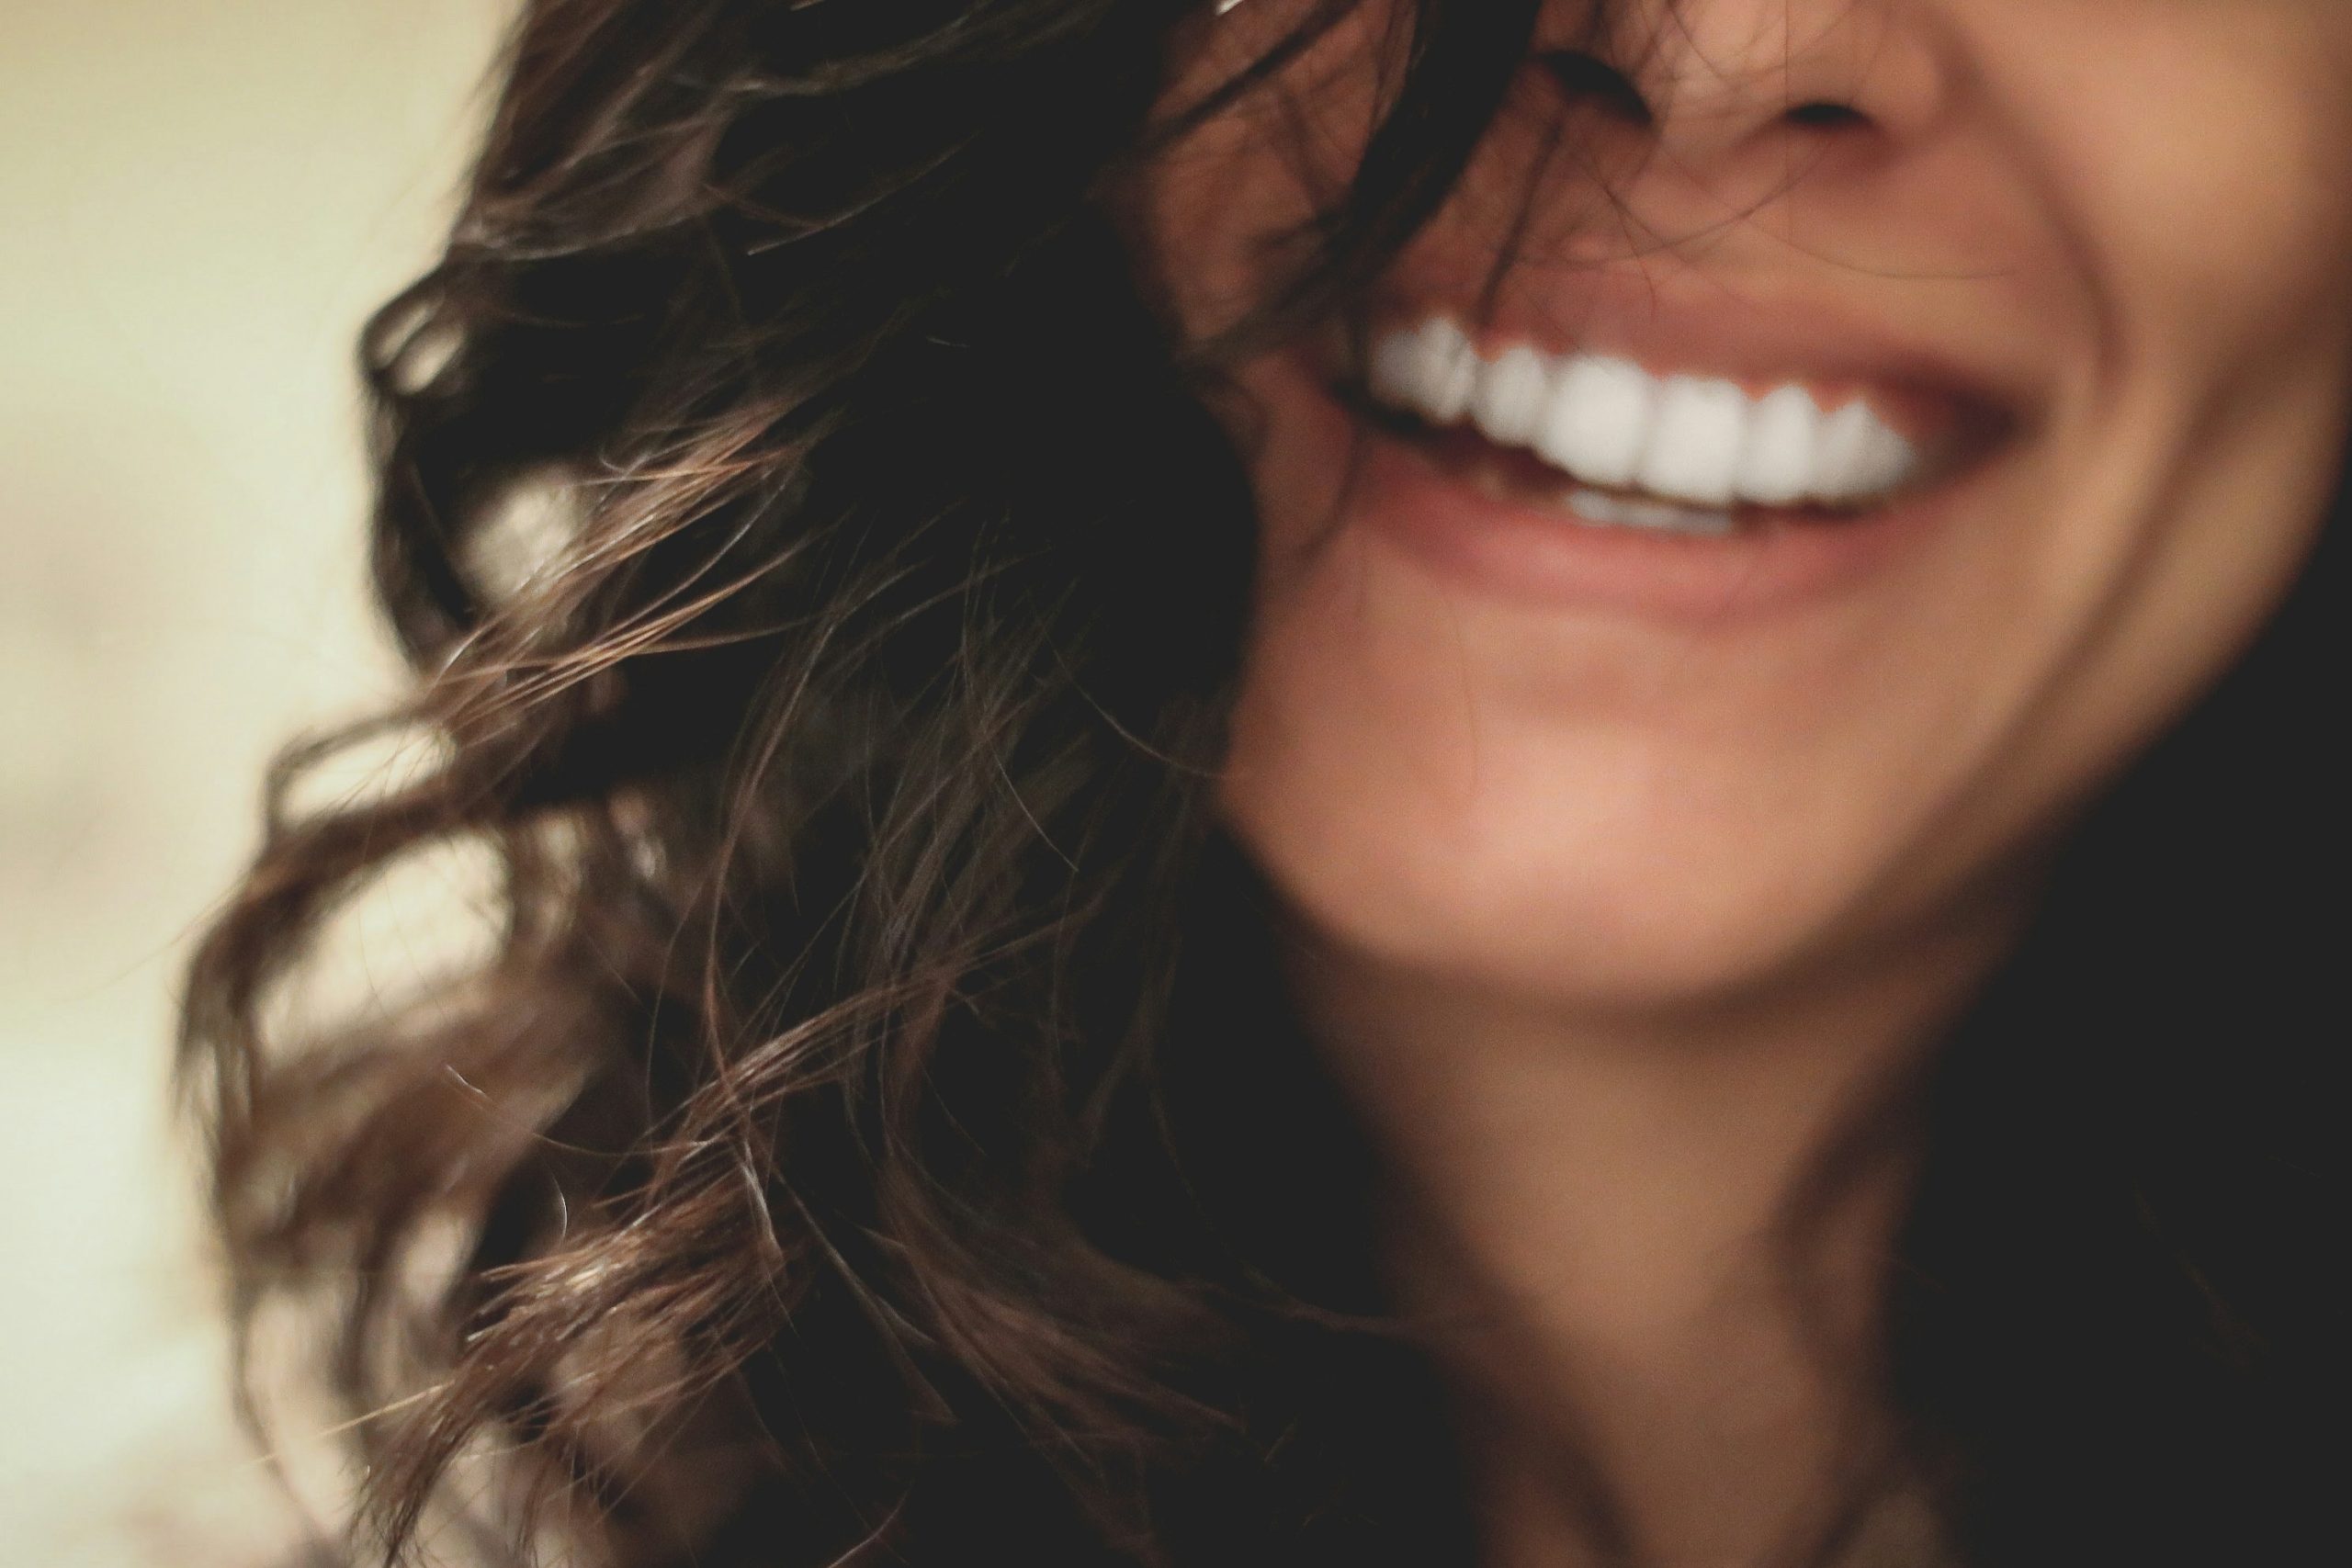 A woman smiling with her hair by the side of her face. Her smile is in focus.